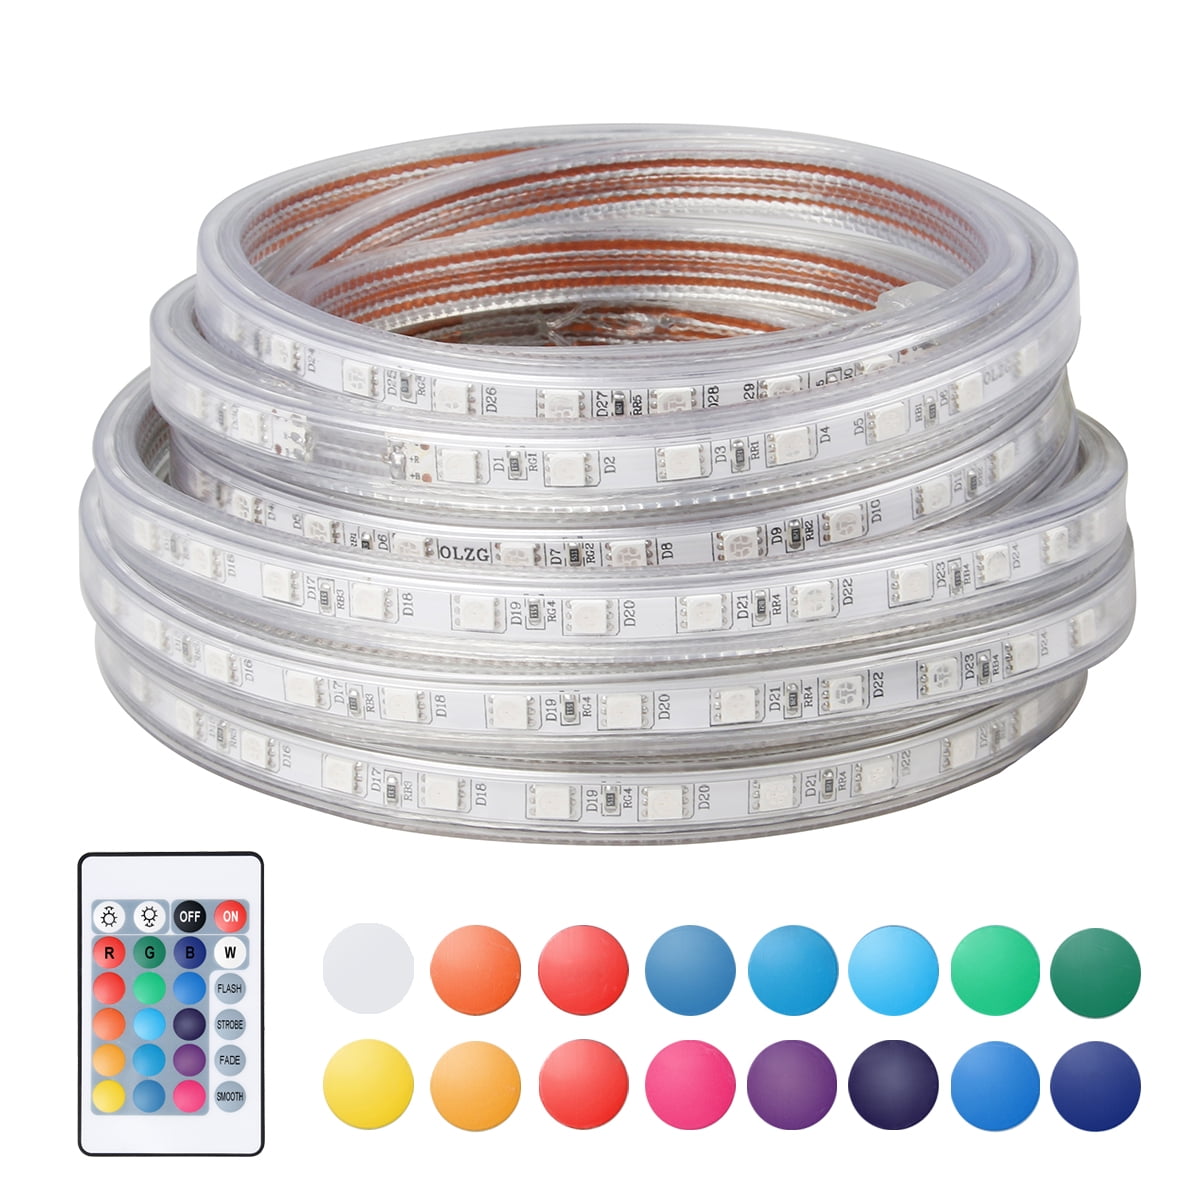 50 LED One Stop 5 M Waterproof Solar Power LED Strip Rope Garden Lights Outdoor 